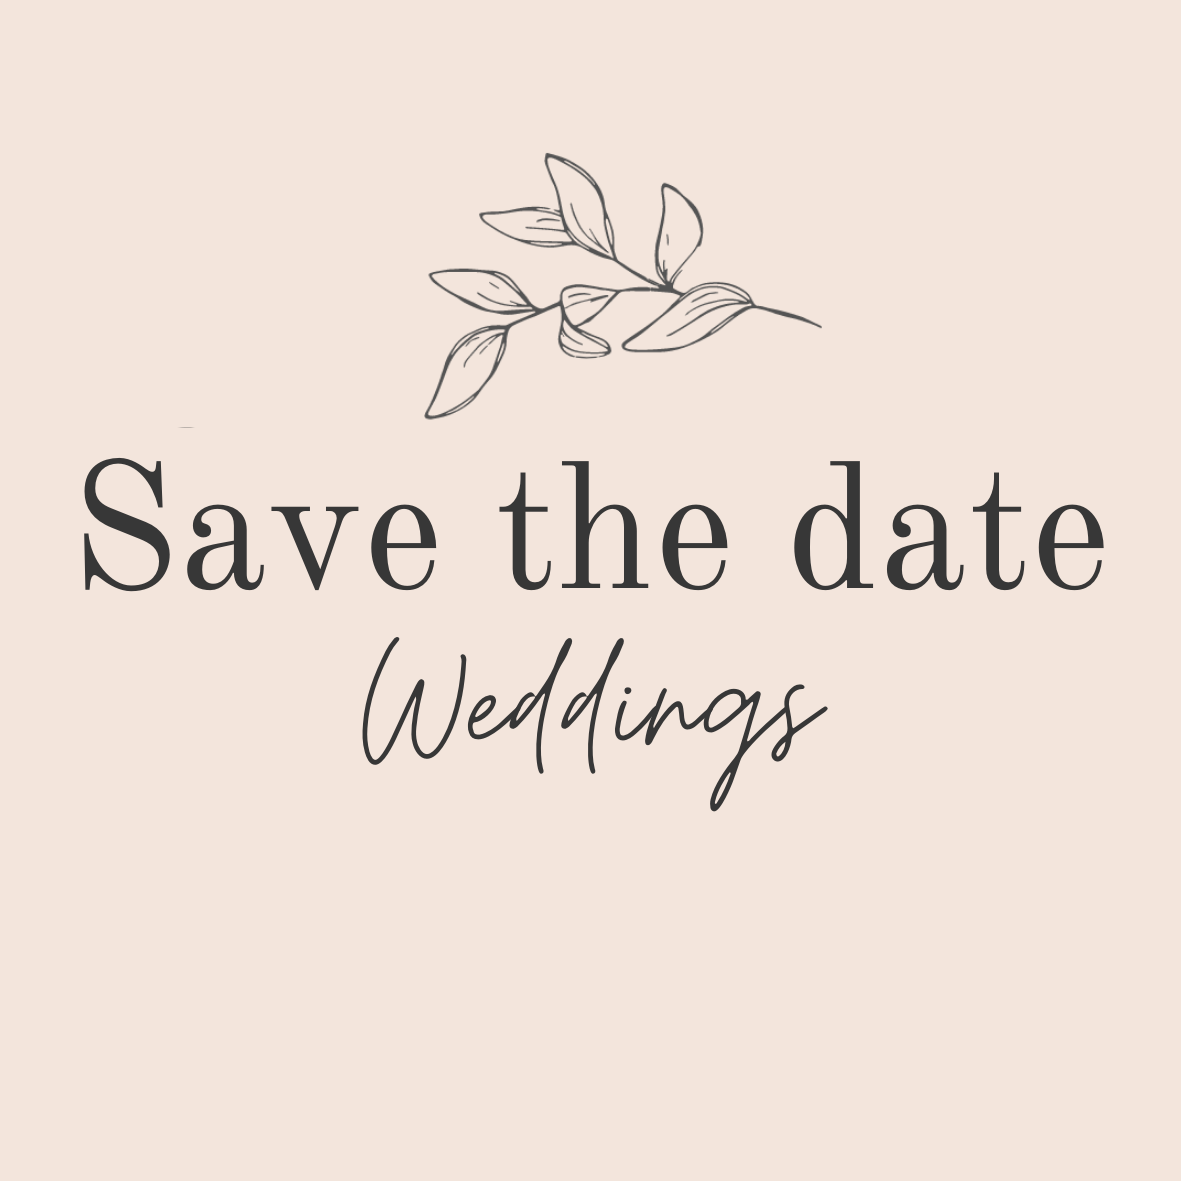 Save the date Weddings